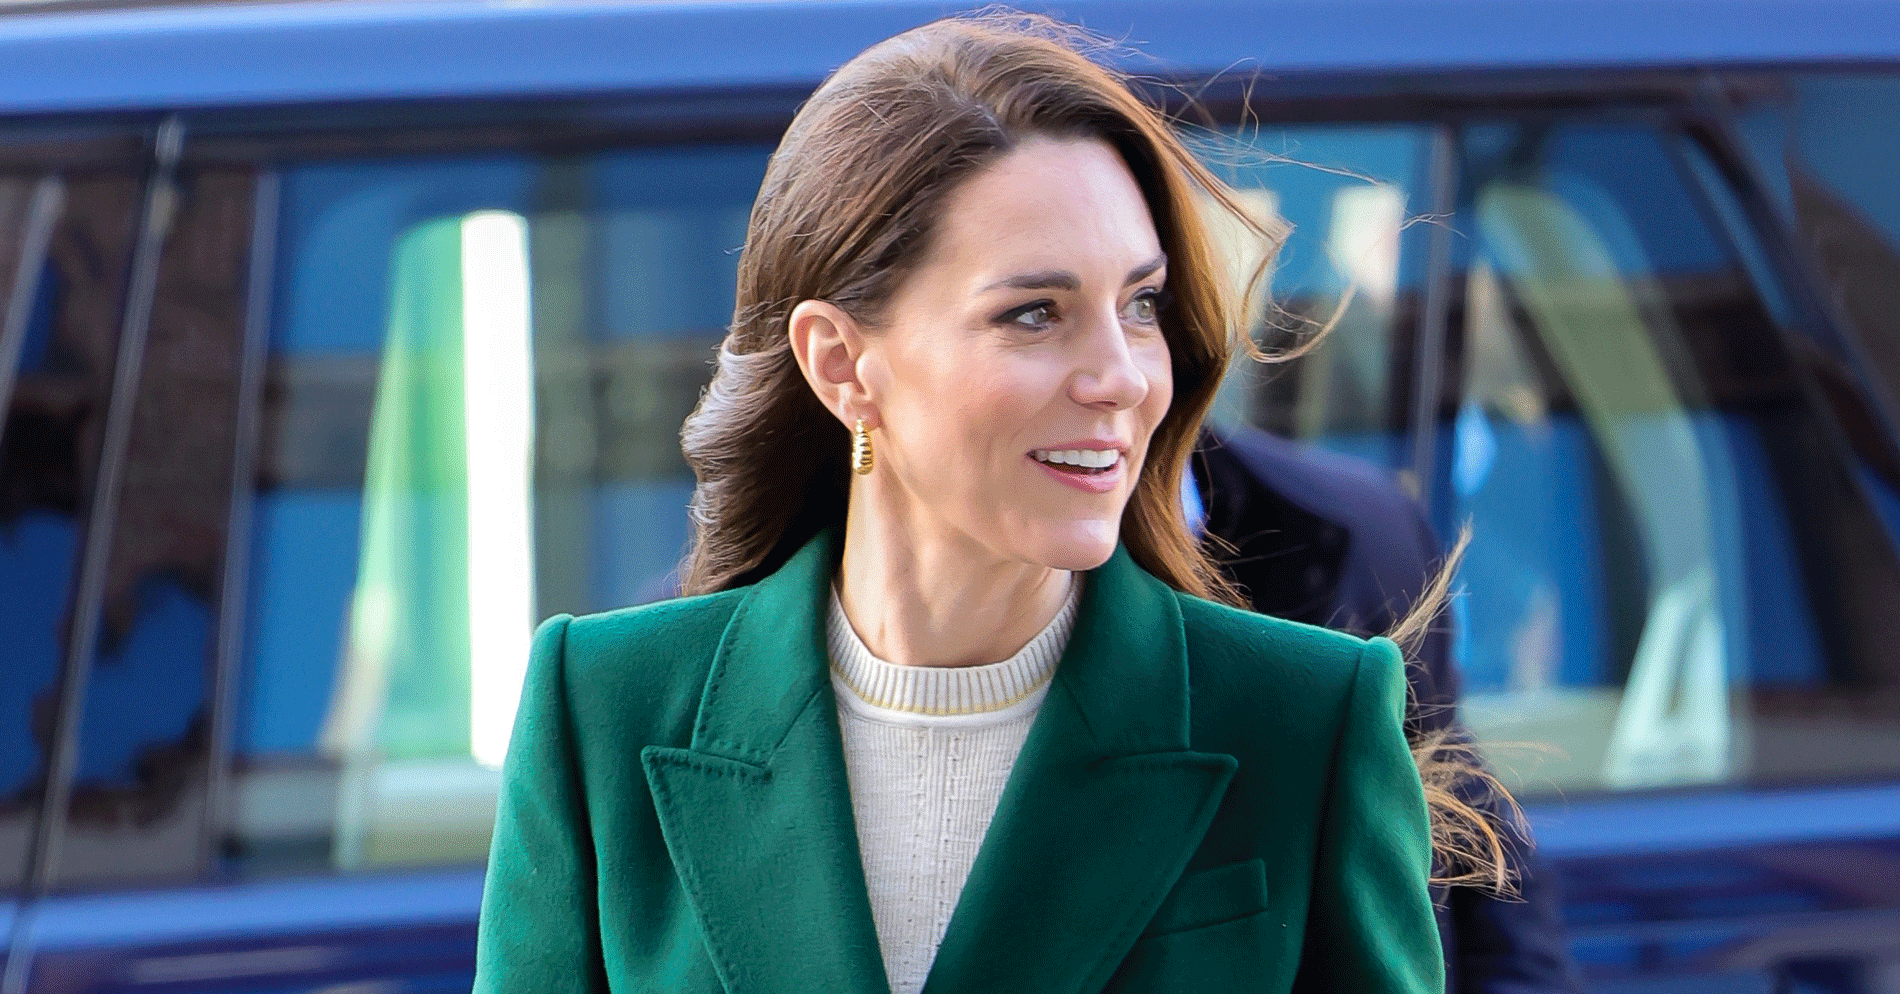 4 Outdated Trends Kate Middleton Never Wears Anymore